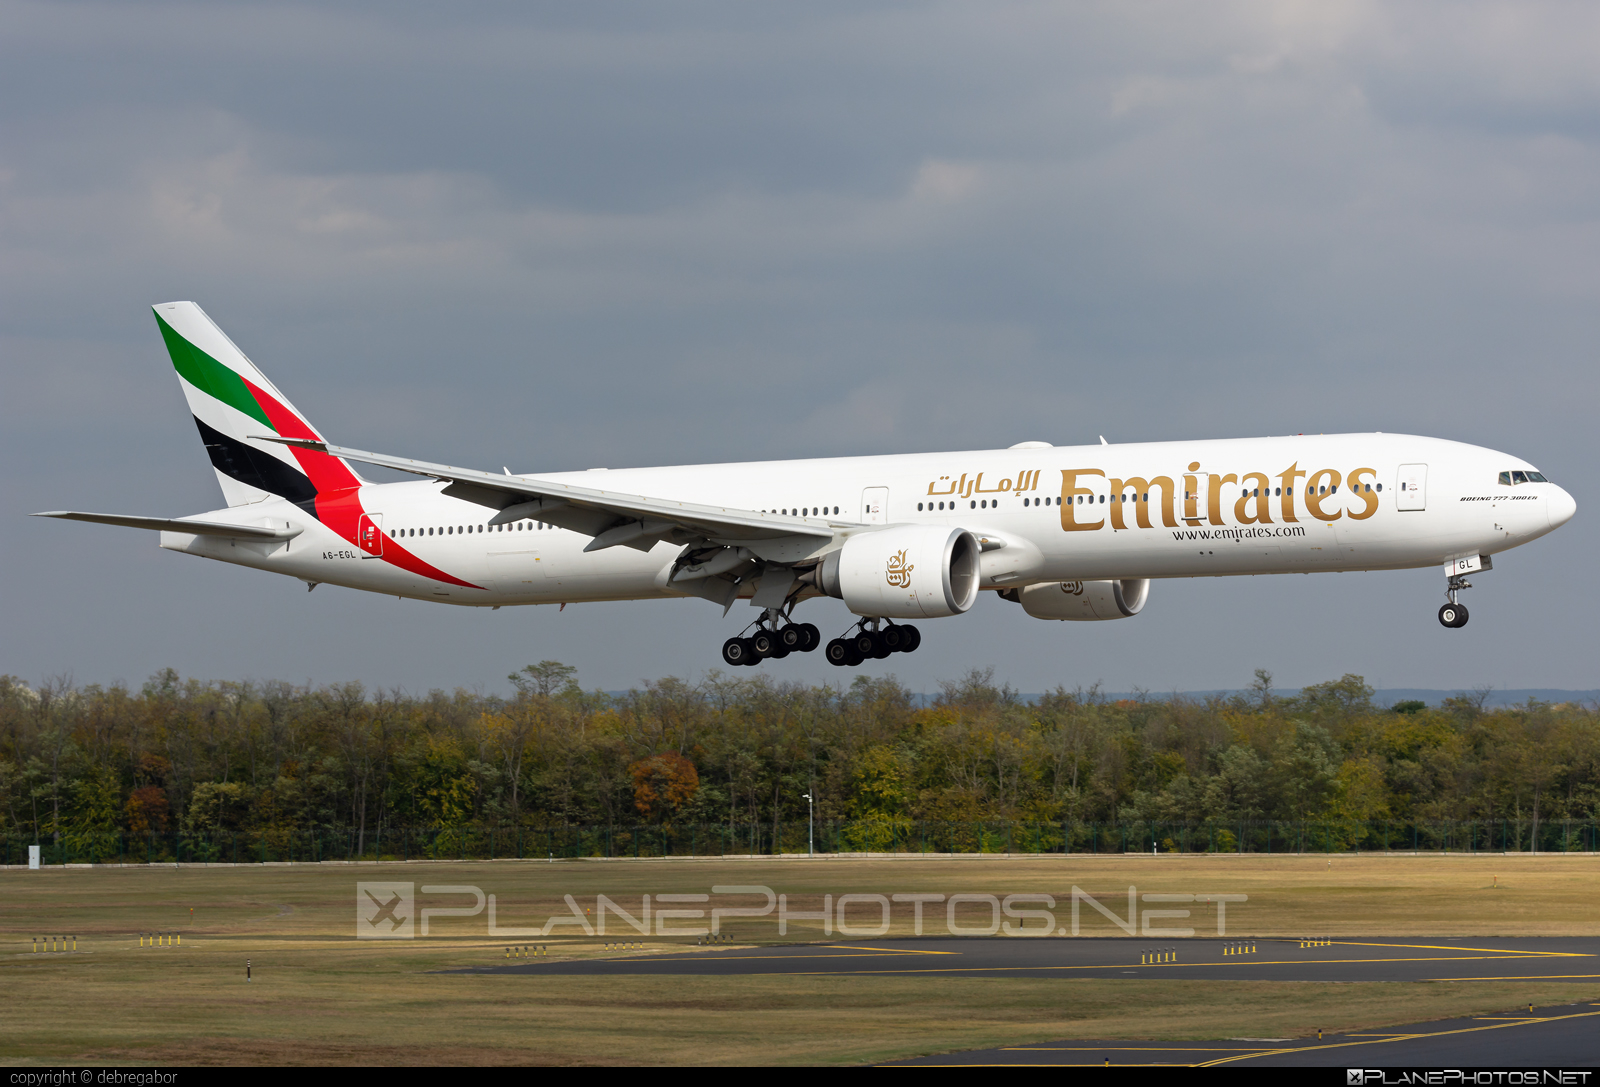 Boeing 777-300ER - A6-EGL operated by Emirates #b777 #b777er #boeing #boeing777 #emirates #tripleseven